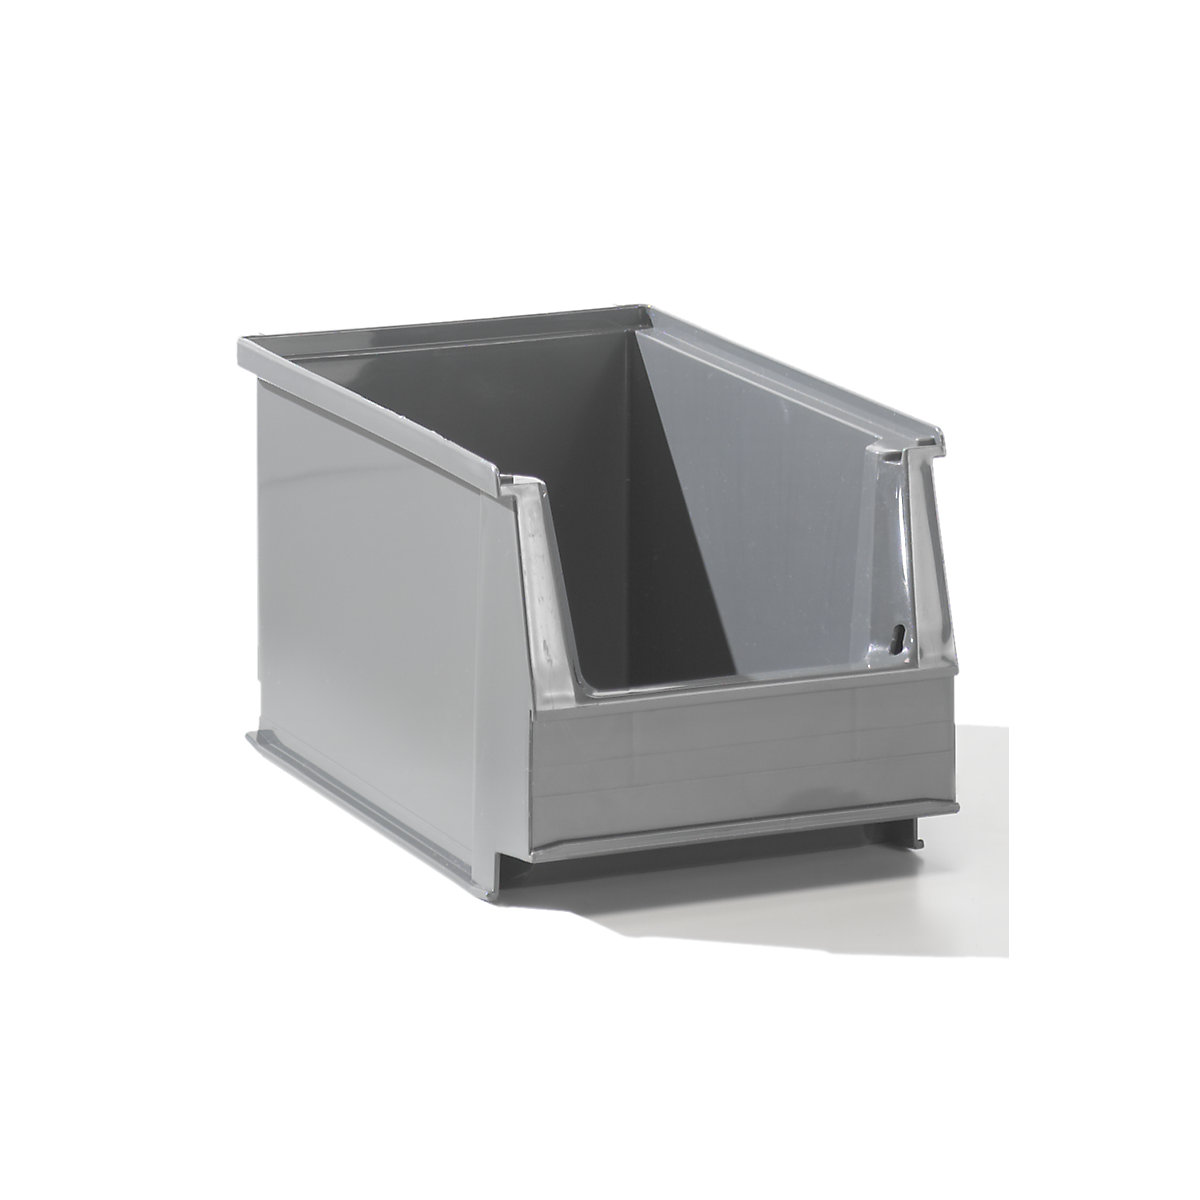 Open fronted storage bin made of recycled PE